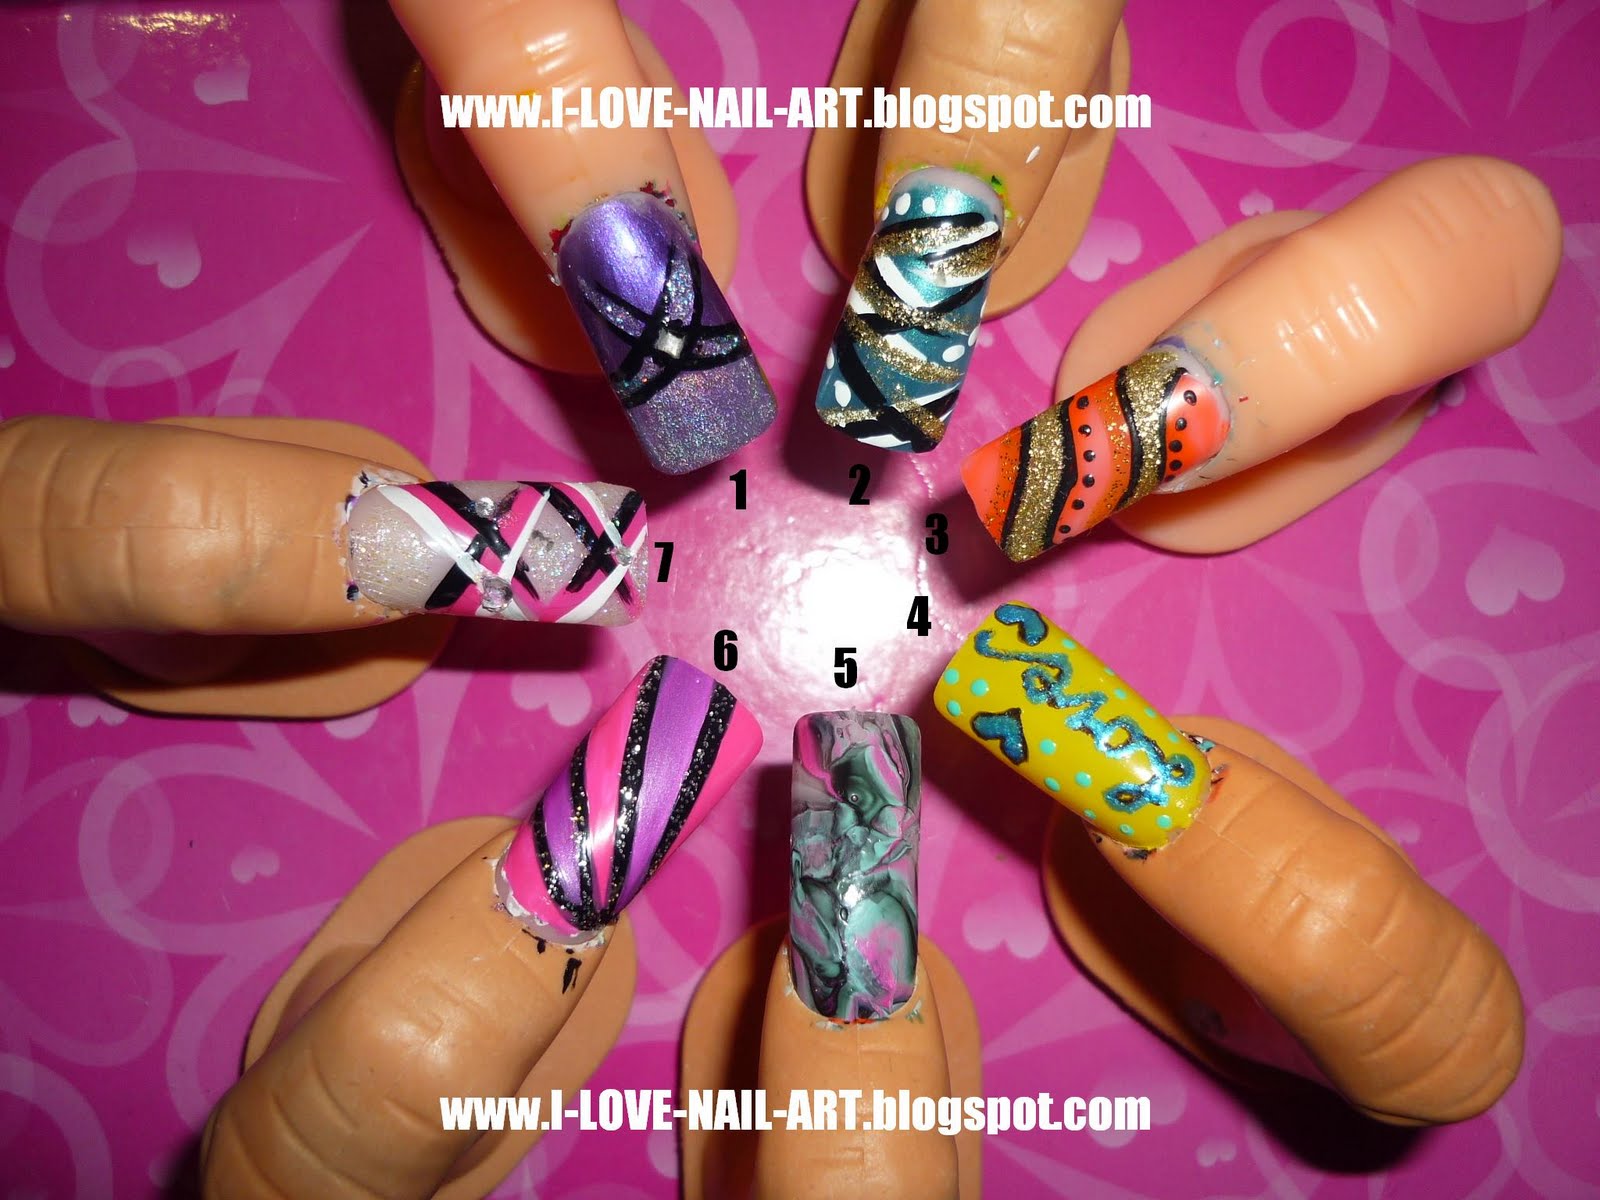 2. 50 Amazing Nail Art Designs For Beginners With Pictures And - wide 2